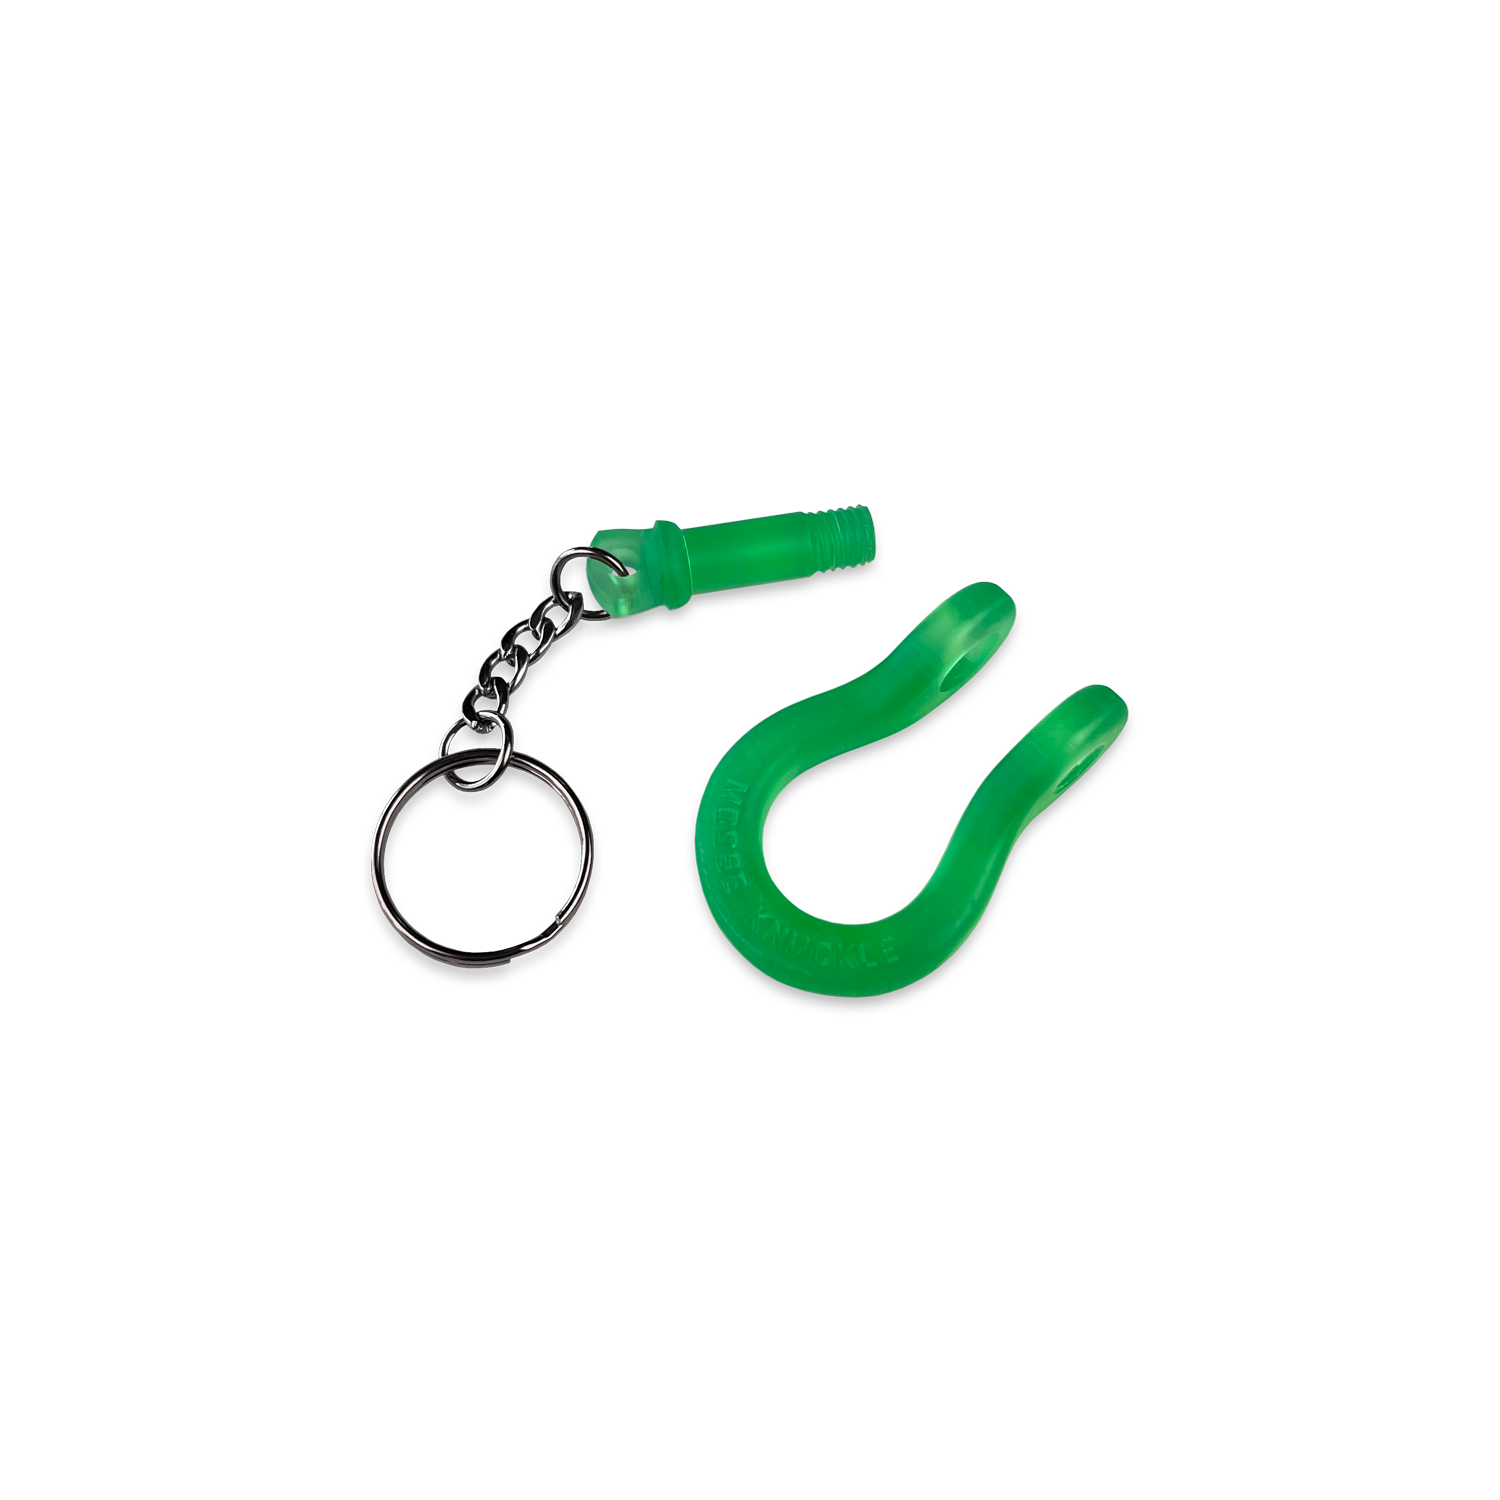 B'oh Shackle Screw Pin Key Chain in Slime Green Pin and Body